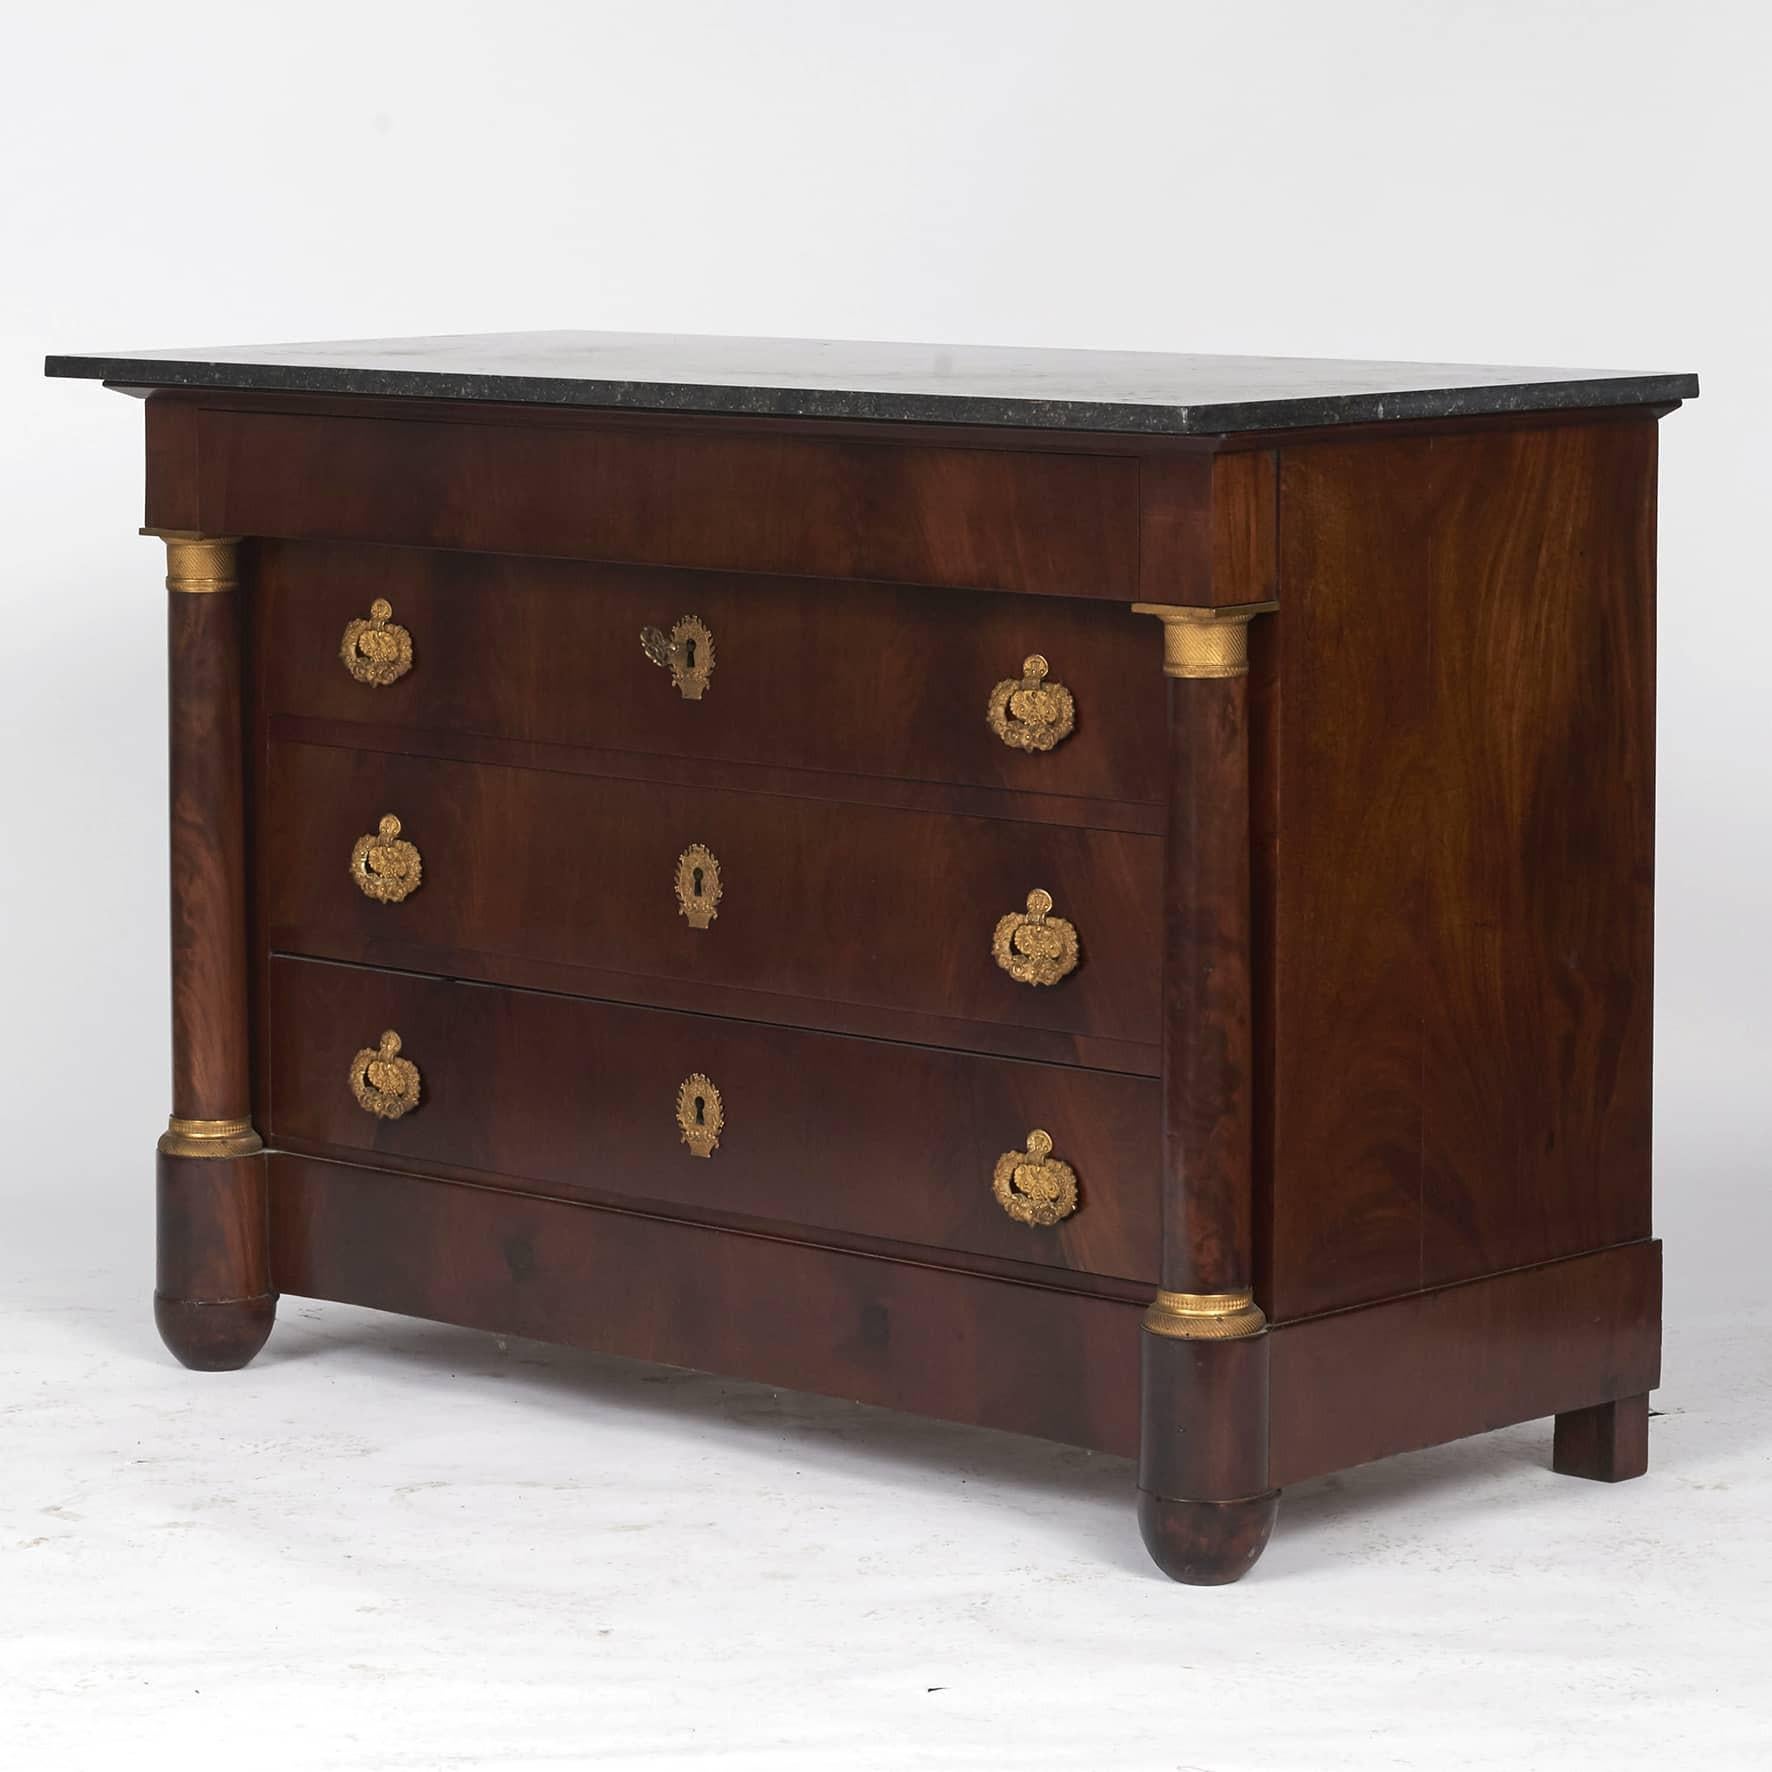 Charles X mahogany chest of drawers with top in Belgian black marble.
4 Drawers flanked by free columns with gilded bronze capitals.
Top drawer characterized by simplicity without decorations, the bottom 3 with original gilded hardware and